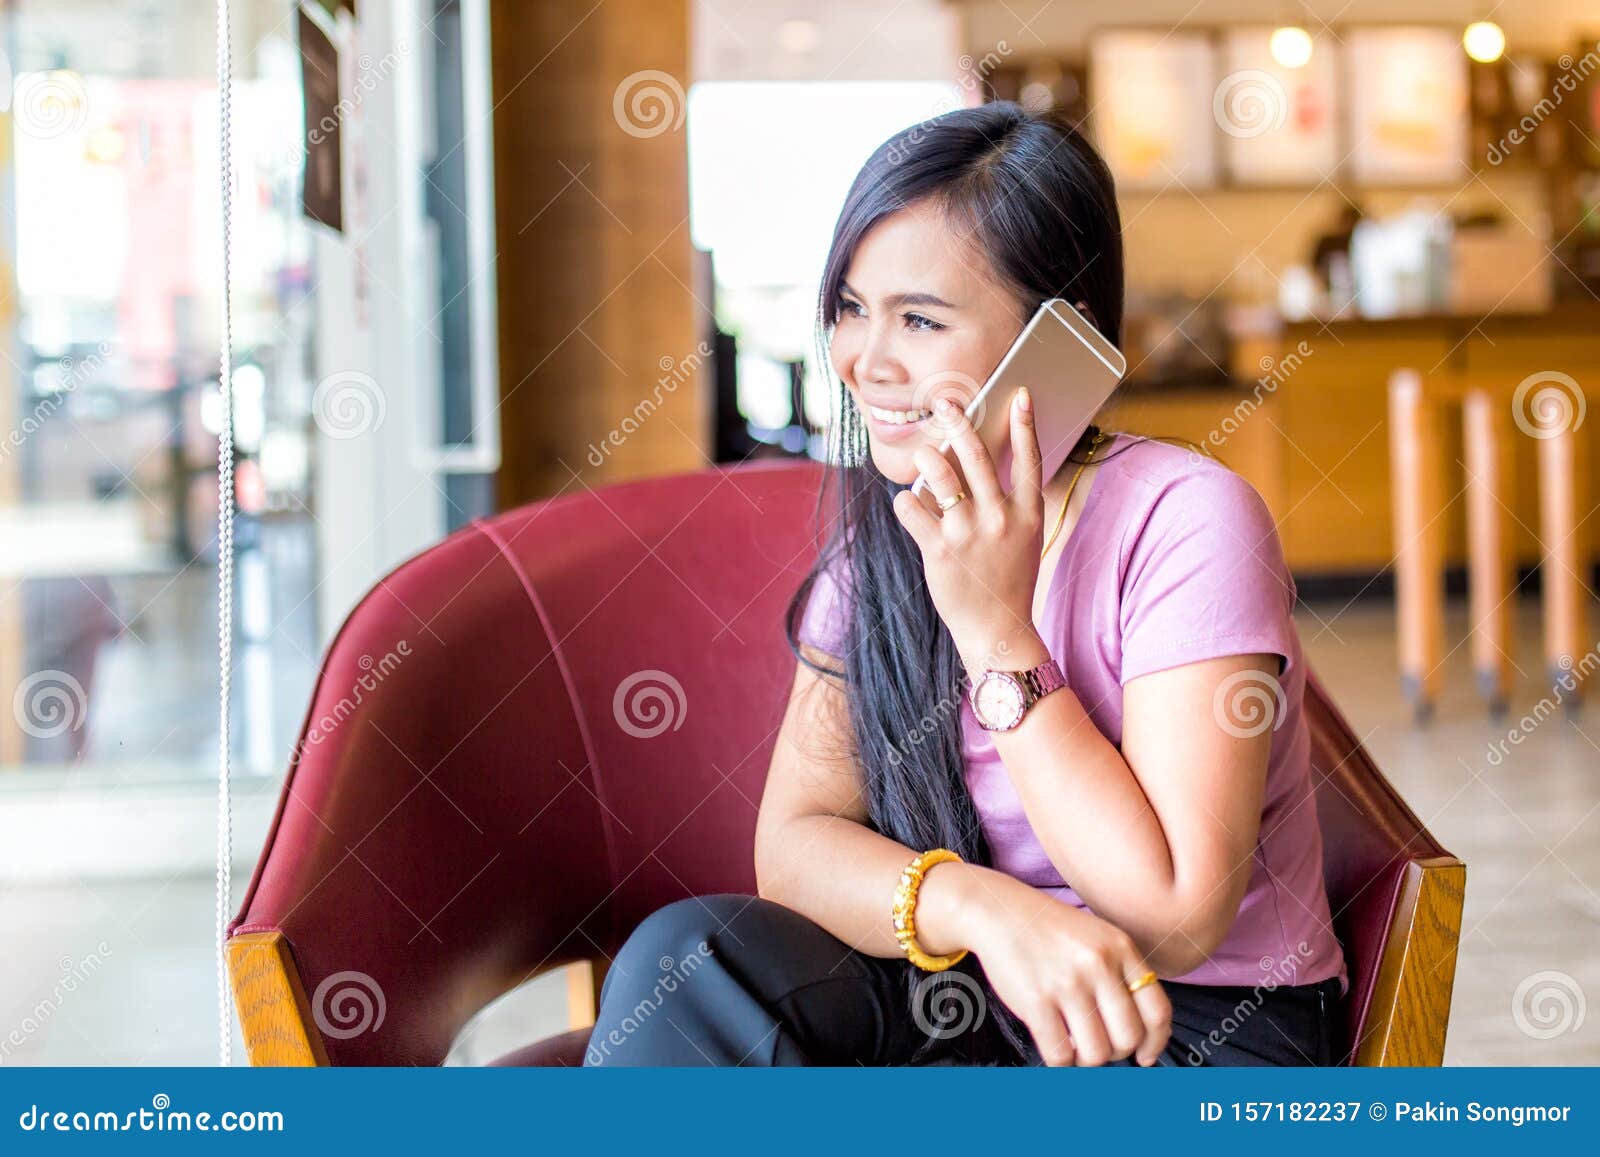 young asain woman smiling in cafee shop talking mobile phone and texting in social networks, sitting alone